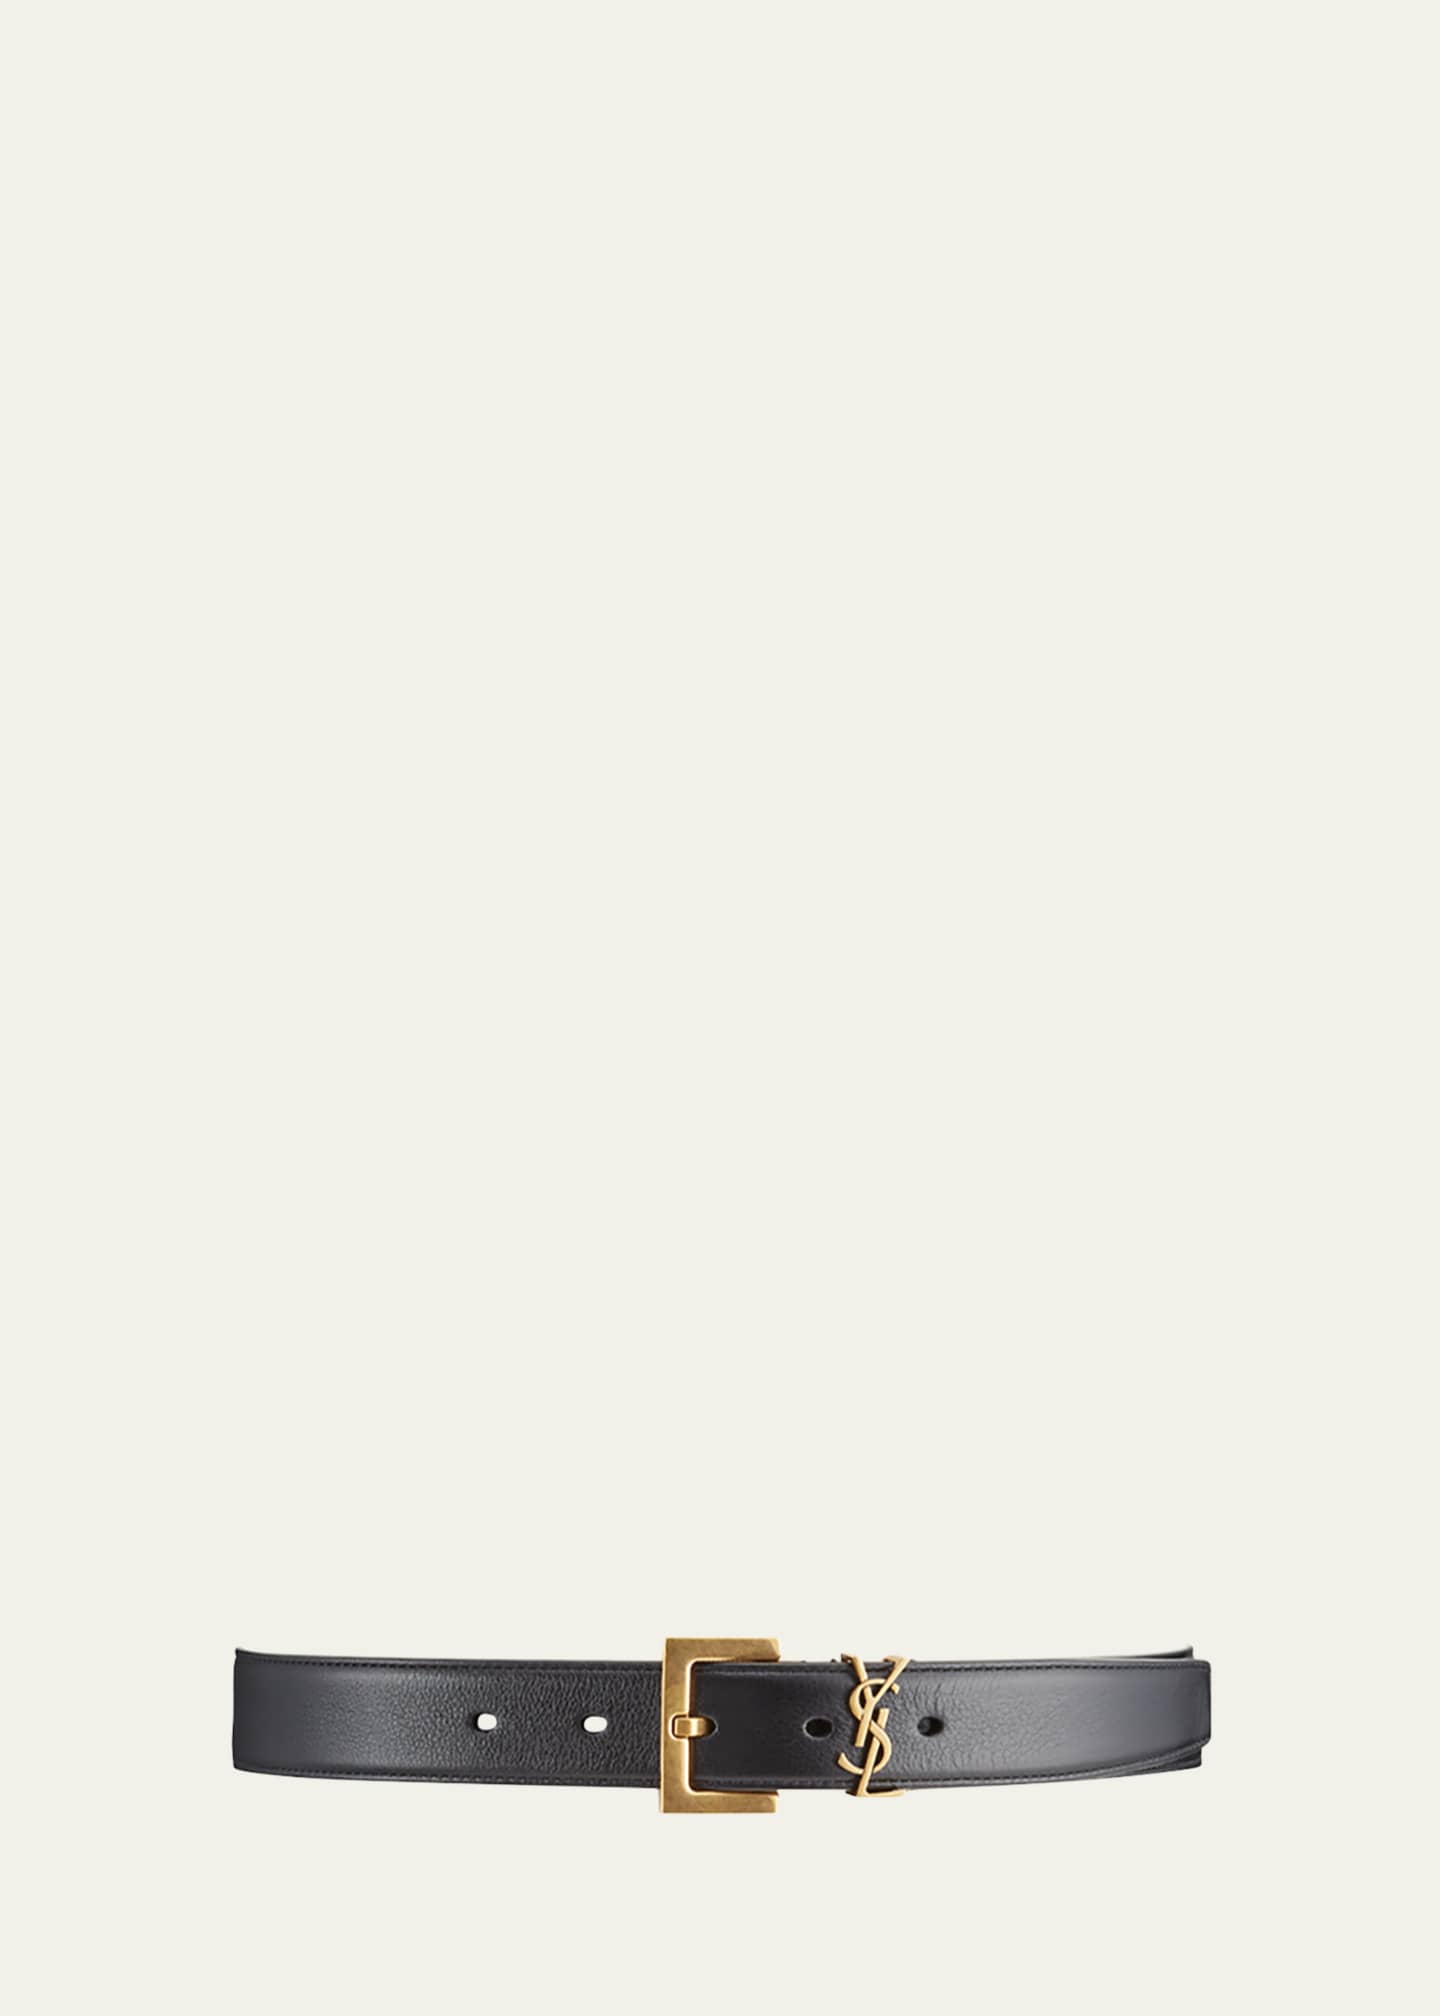 Off-White OW initials Black Leather Belt, Women's, 30in / 75cm, Belts Leather Belts